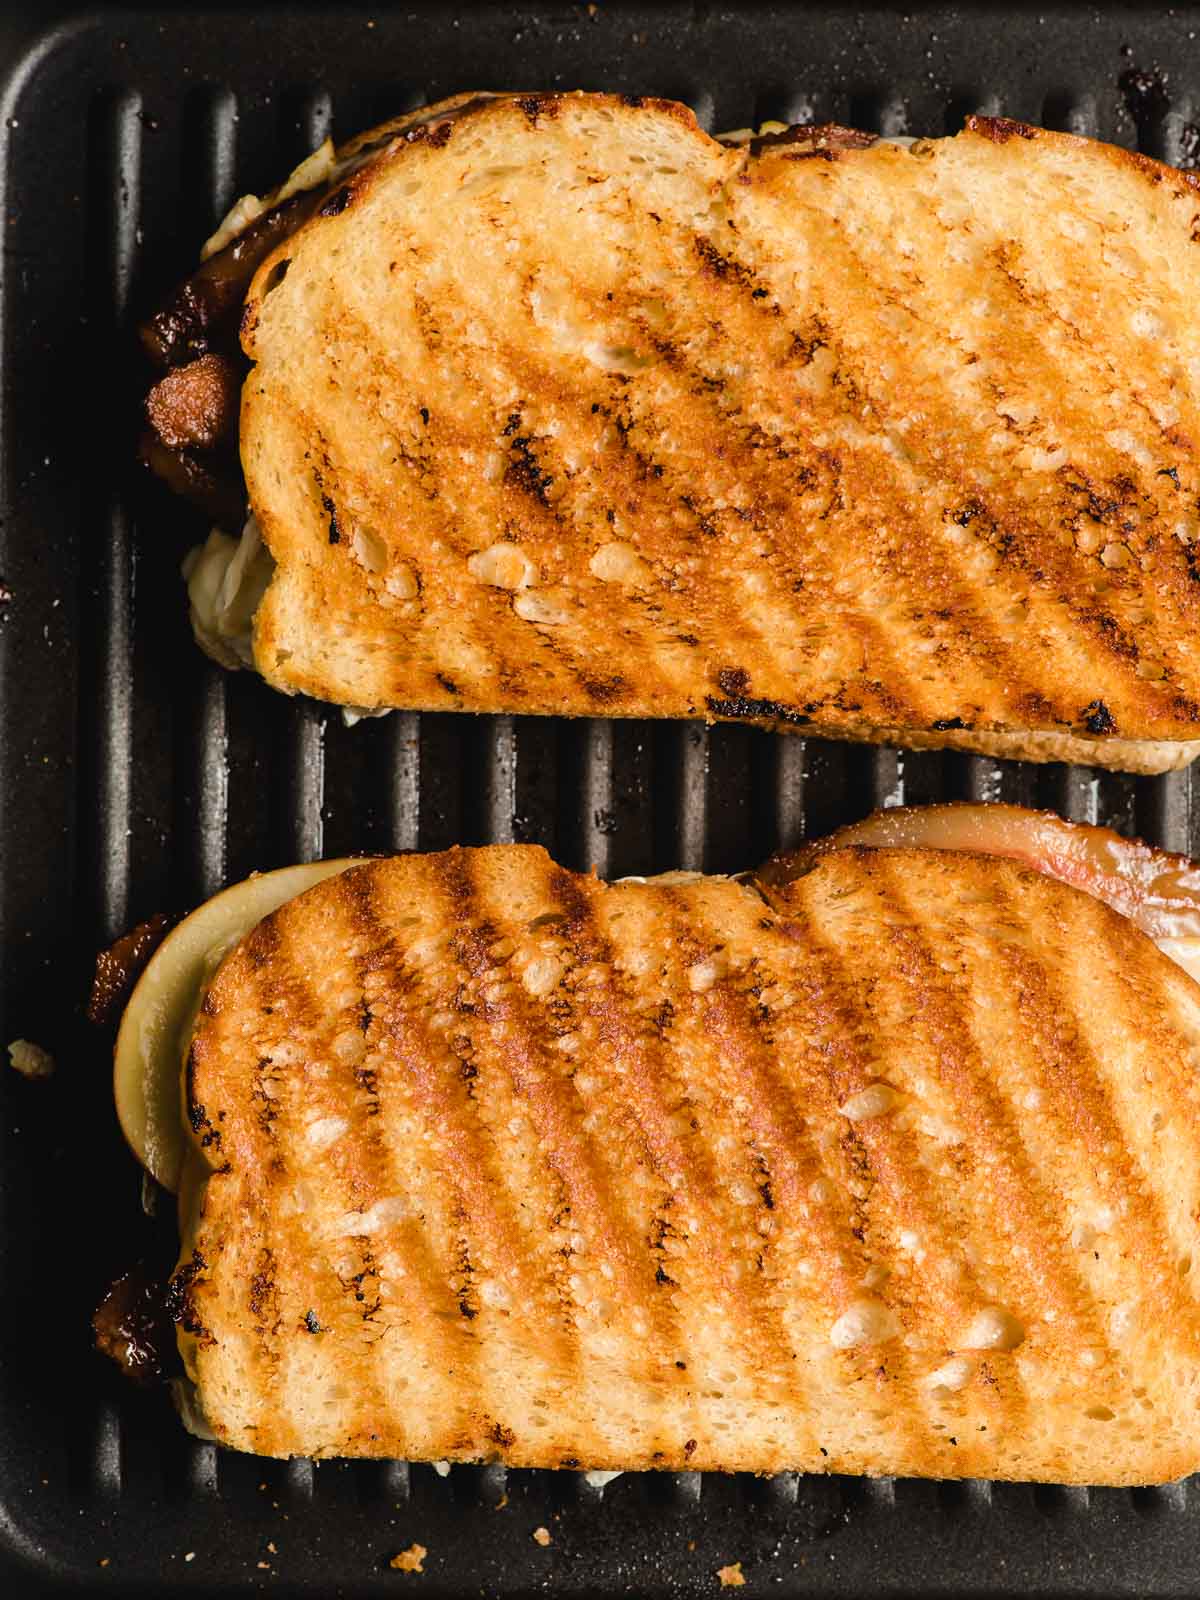 Two grilled cheeses shown on a grill pan.